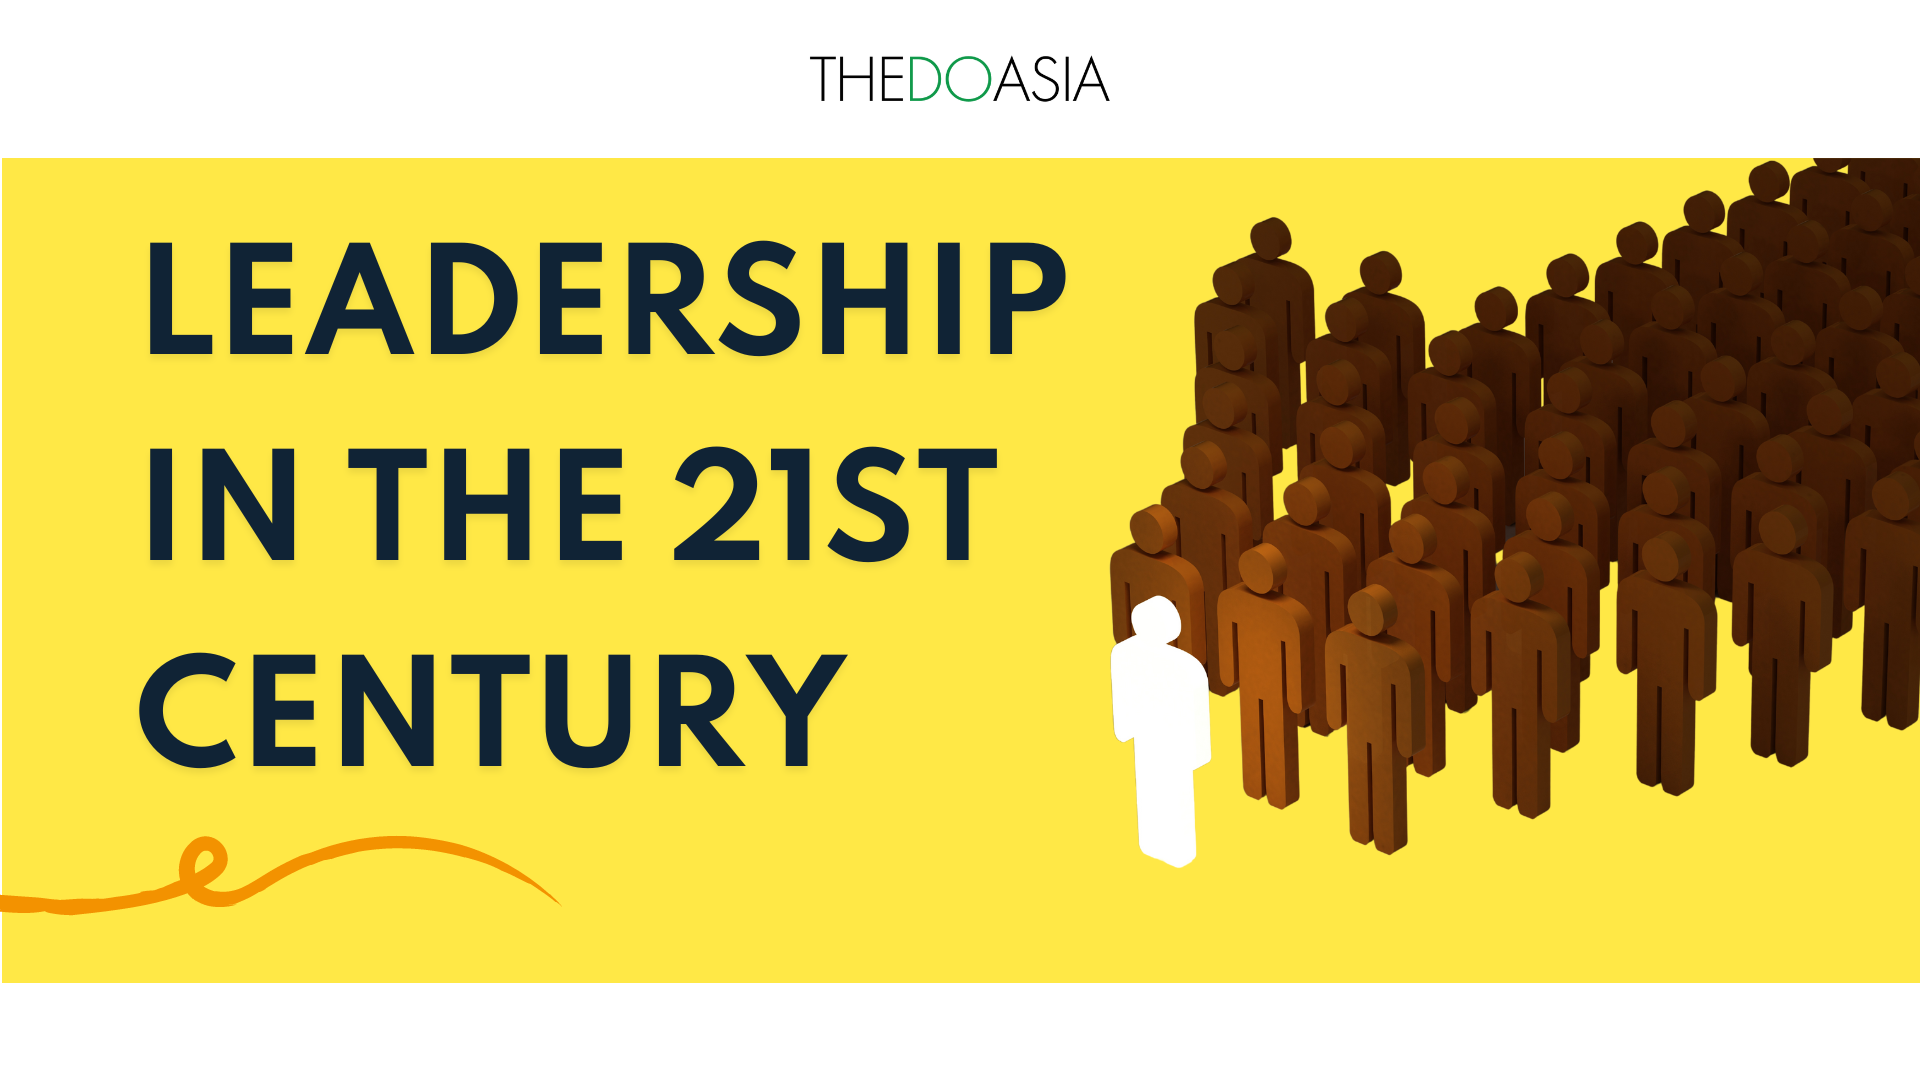 Leadership in the 21st century - The DO Asia